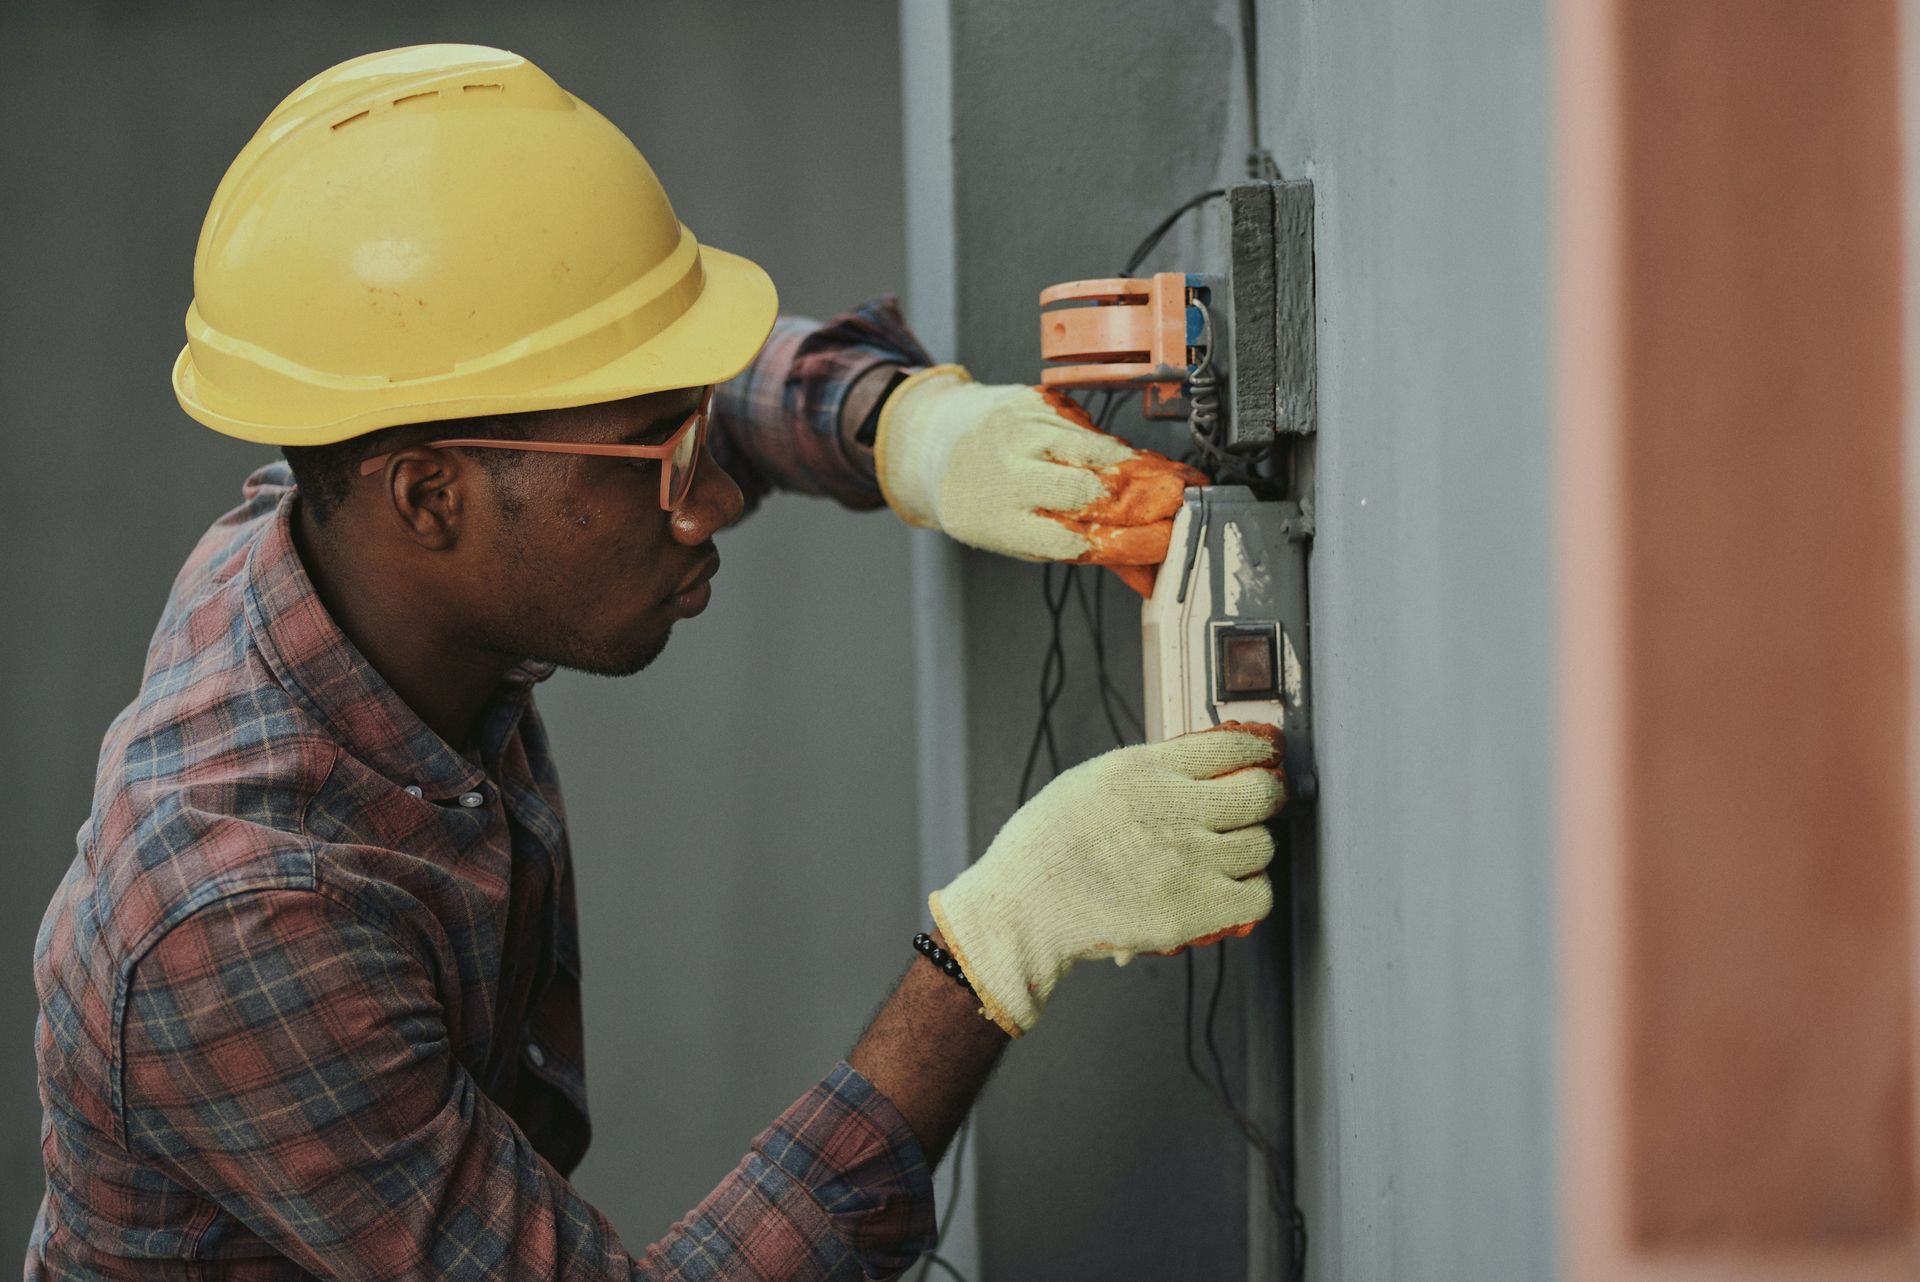 A man wearing a yellow hard hat works on Transient Voltage Surge Suppressors